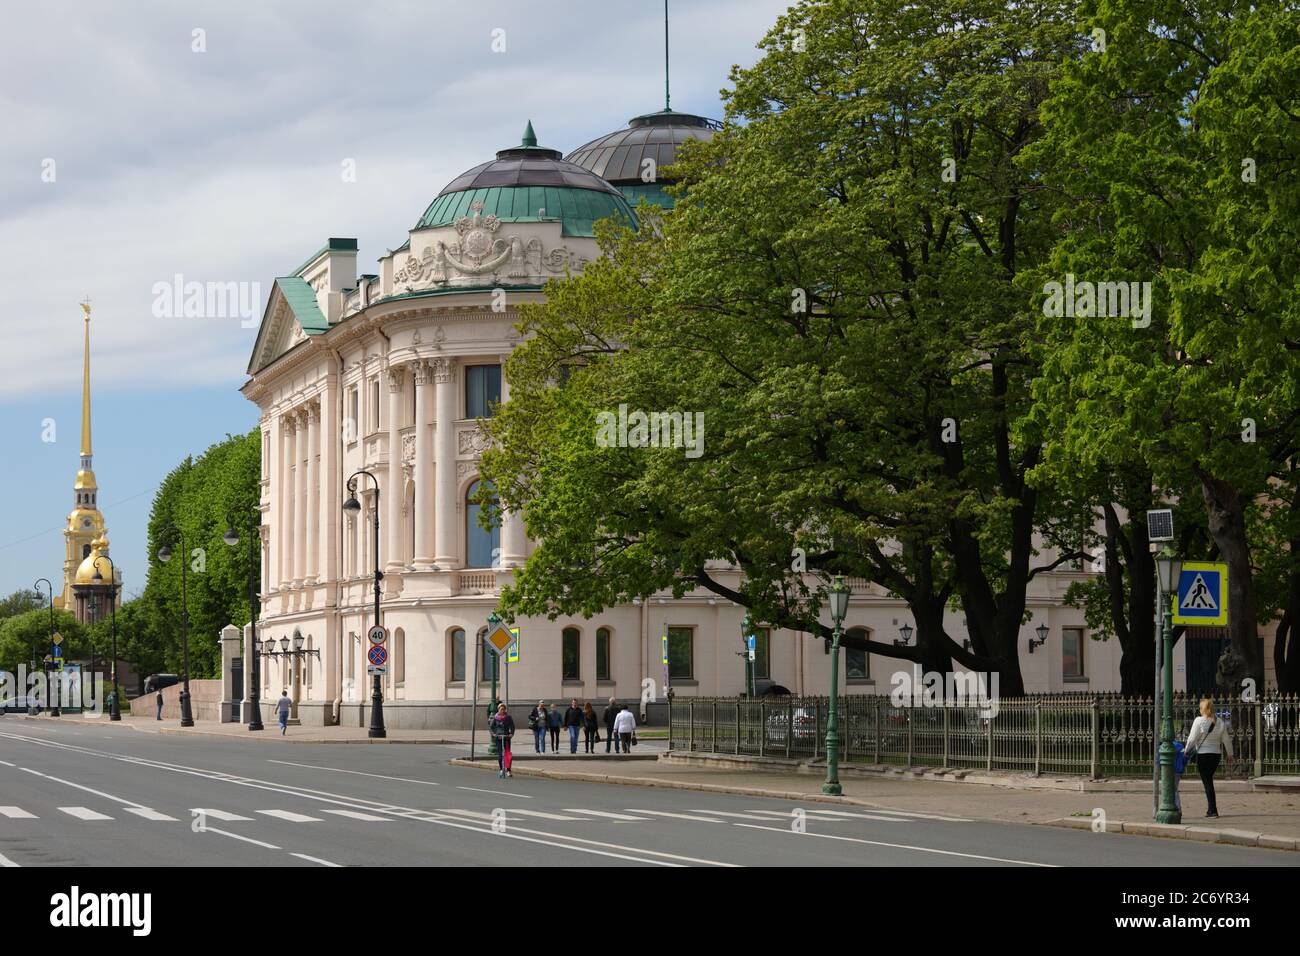 St. Petersburg, Russia - May 19, 2018: Residence of the Plenipotentiary representative of the President of the Russian Federation in the North-Western Federal district. The building was erected in 1910-1913 as the palace of Grand Duke Nikolay Nikolayevich jr. Stock Photo